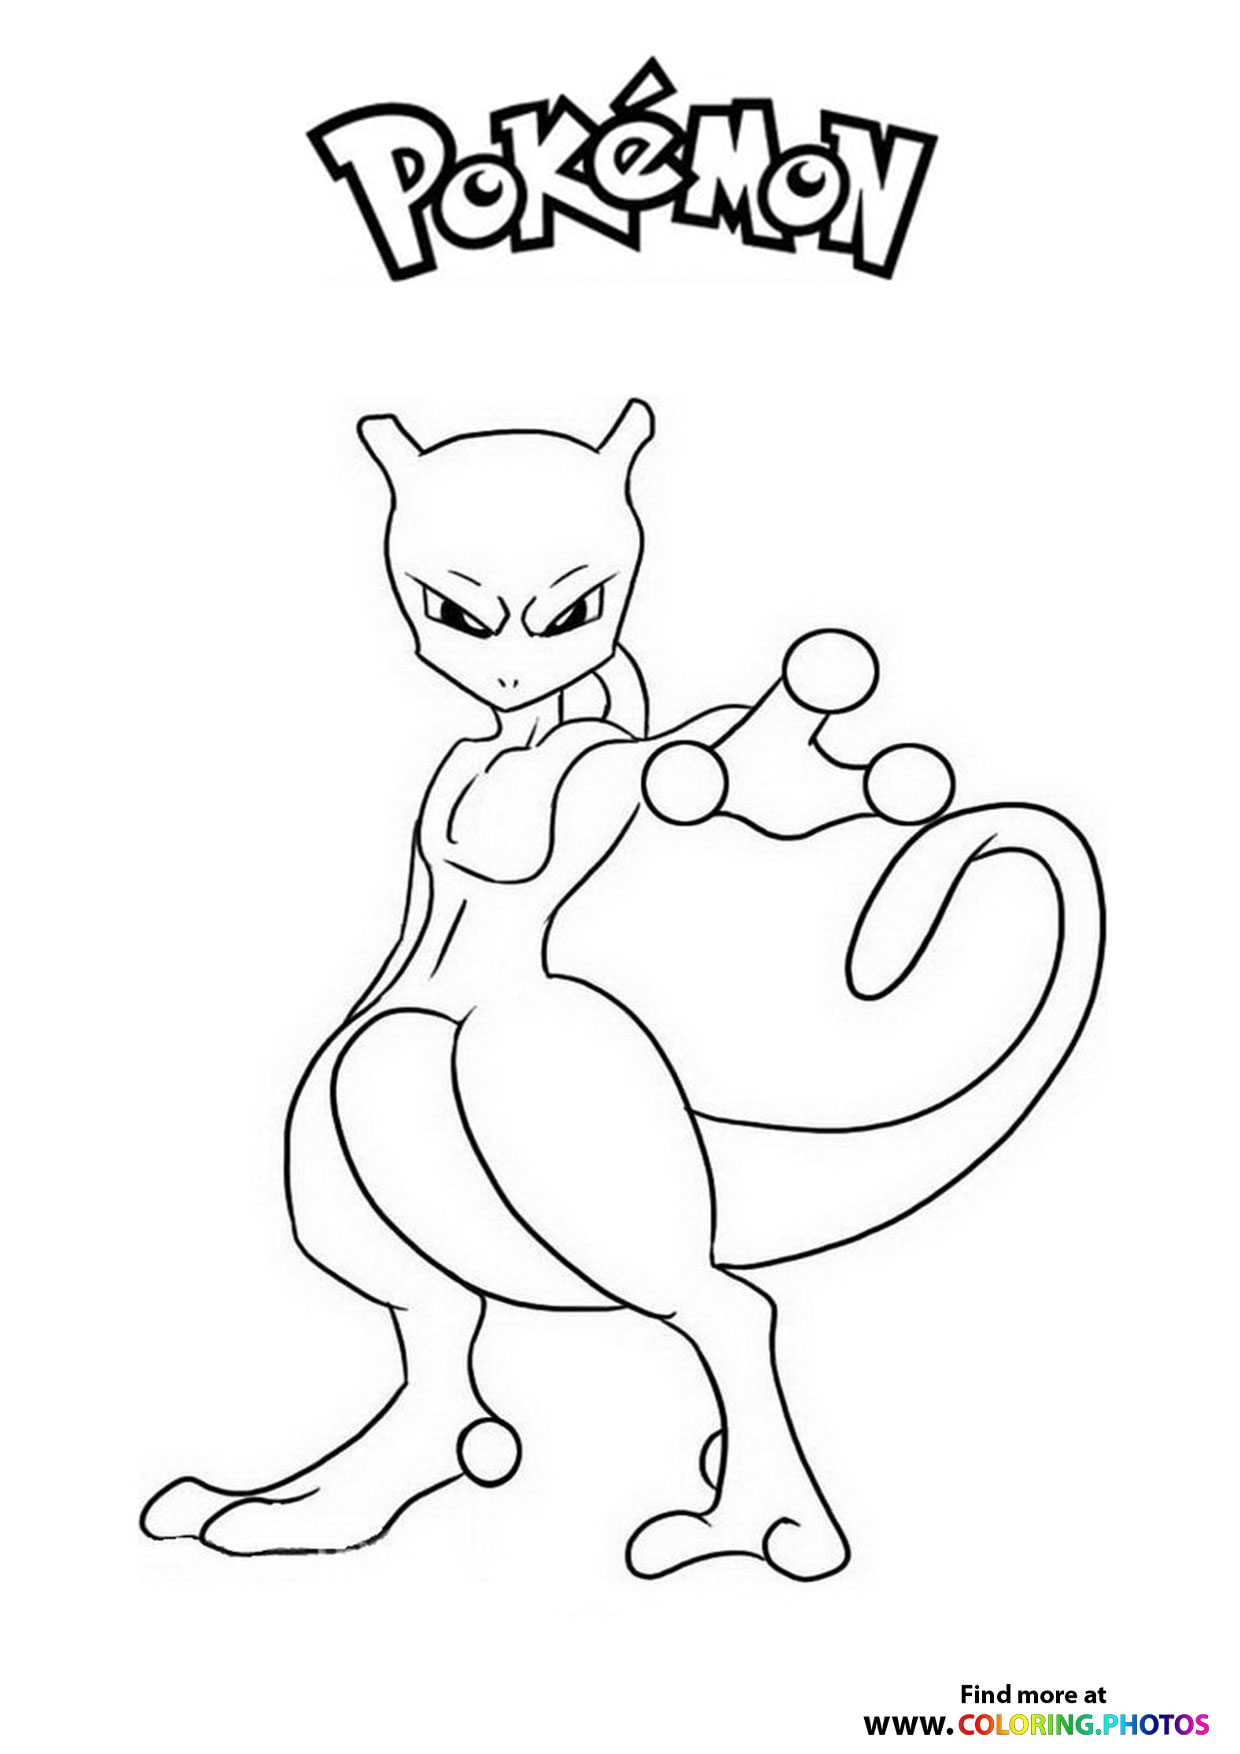 Mewtwo - Pokemon - Coloring Pages for kids